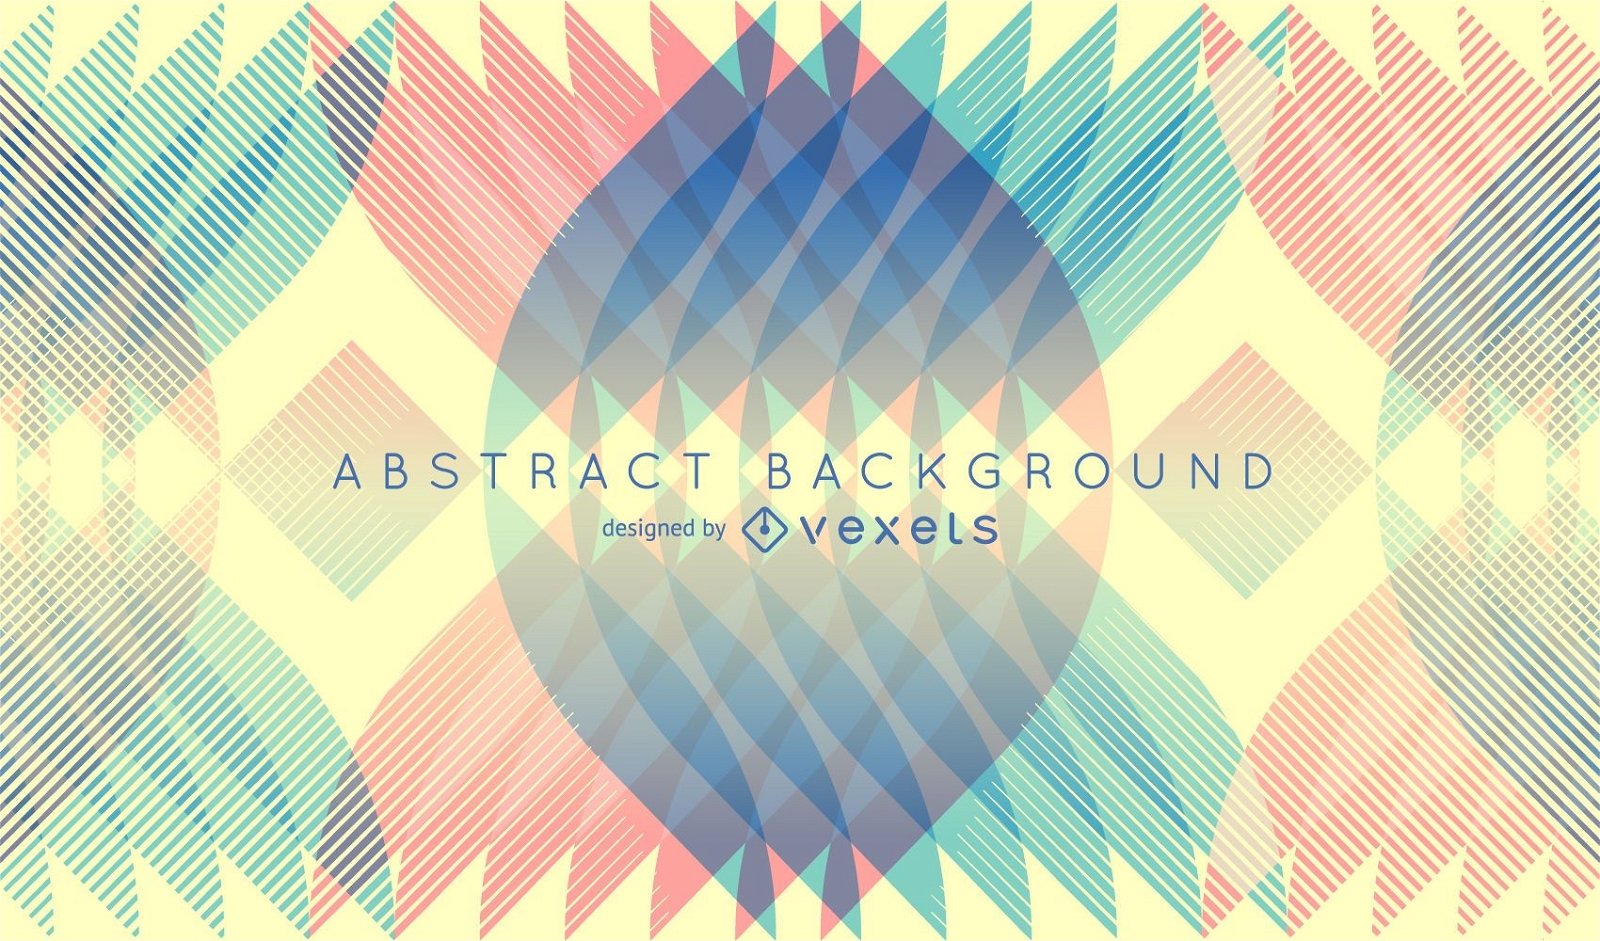 Retro background with geometrical shapes